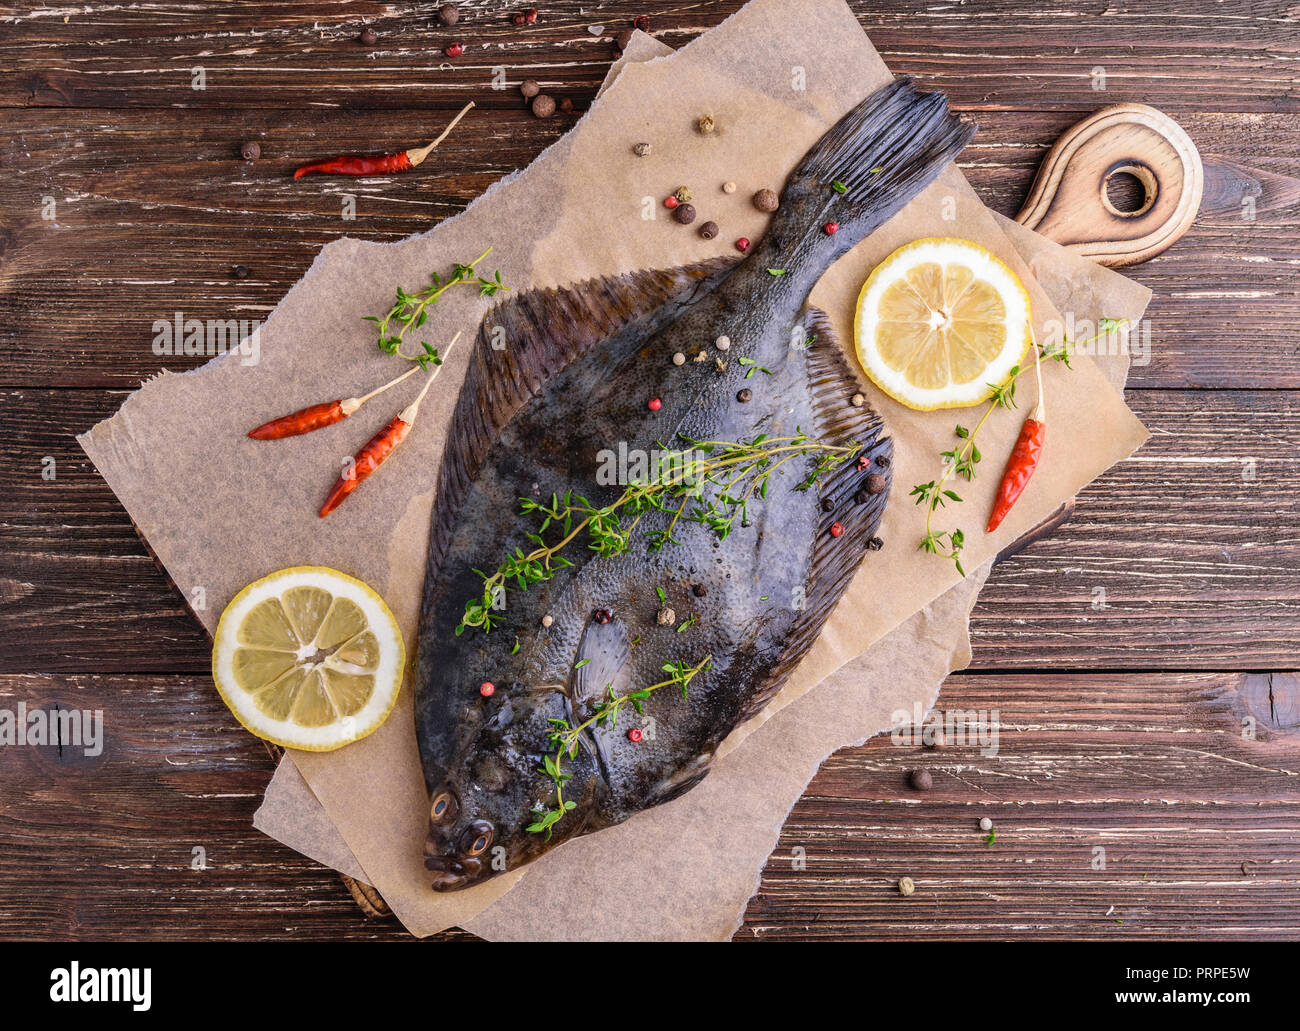 Raw flounder plaice fish (flatfish). Cooking process concept. Flounder fish with spices, lemon slices, thyme on parchment paper. Dark wooden table bac Stock Photo